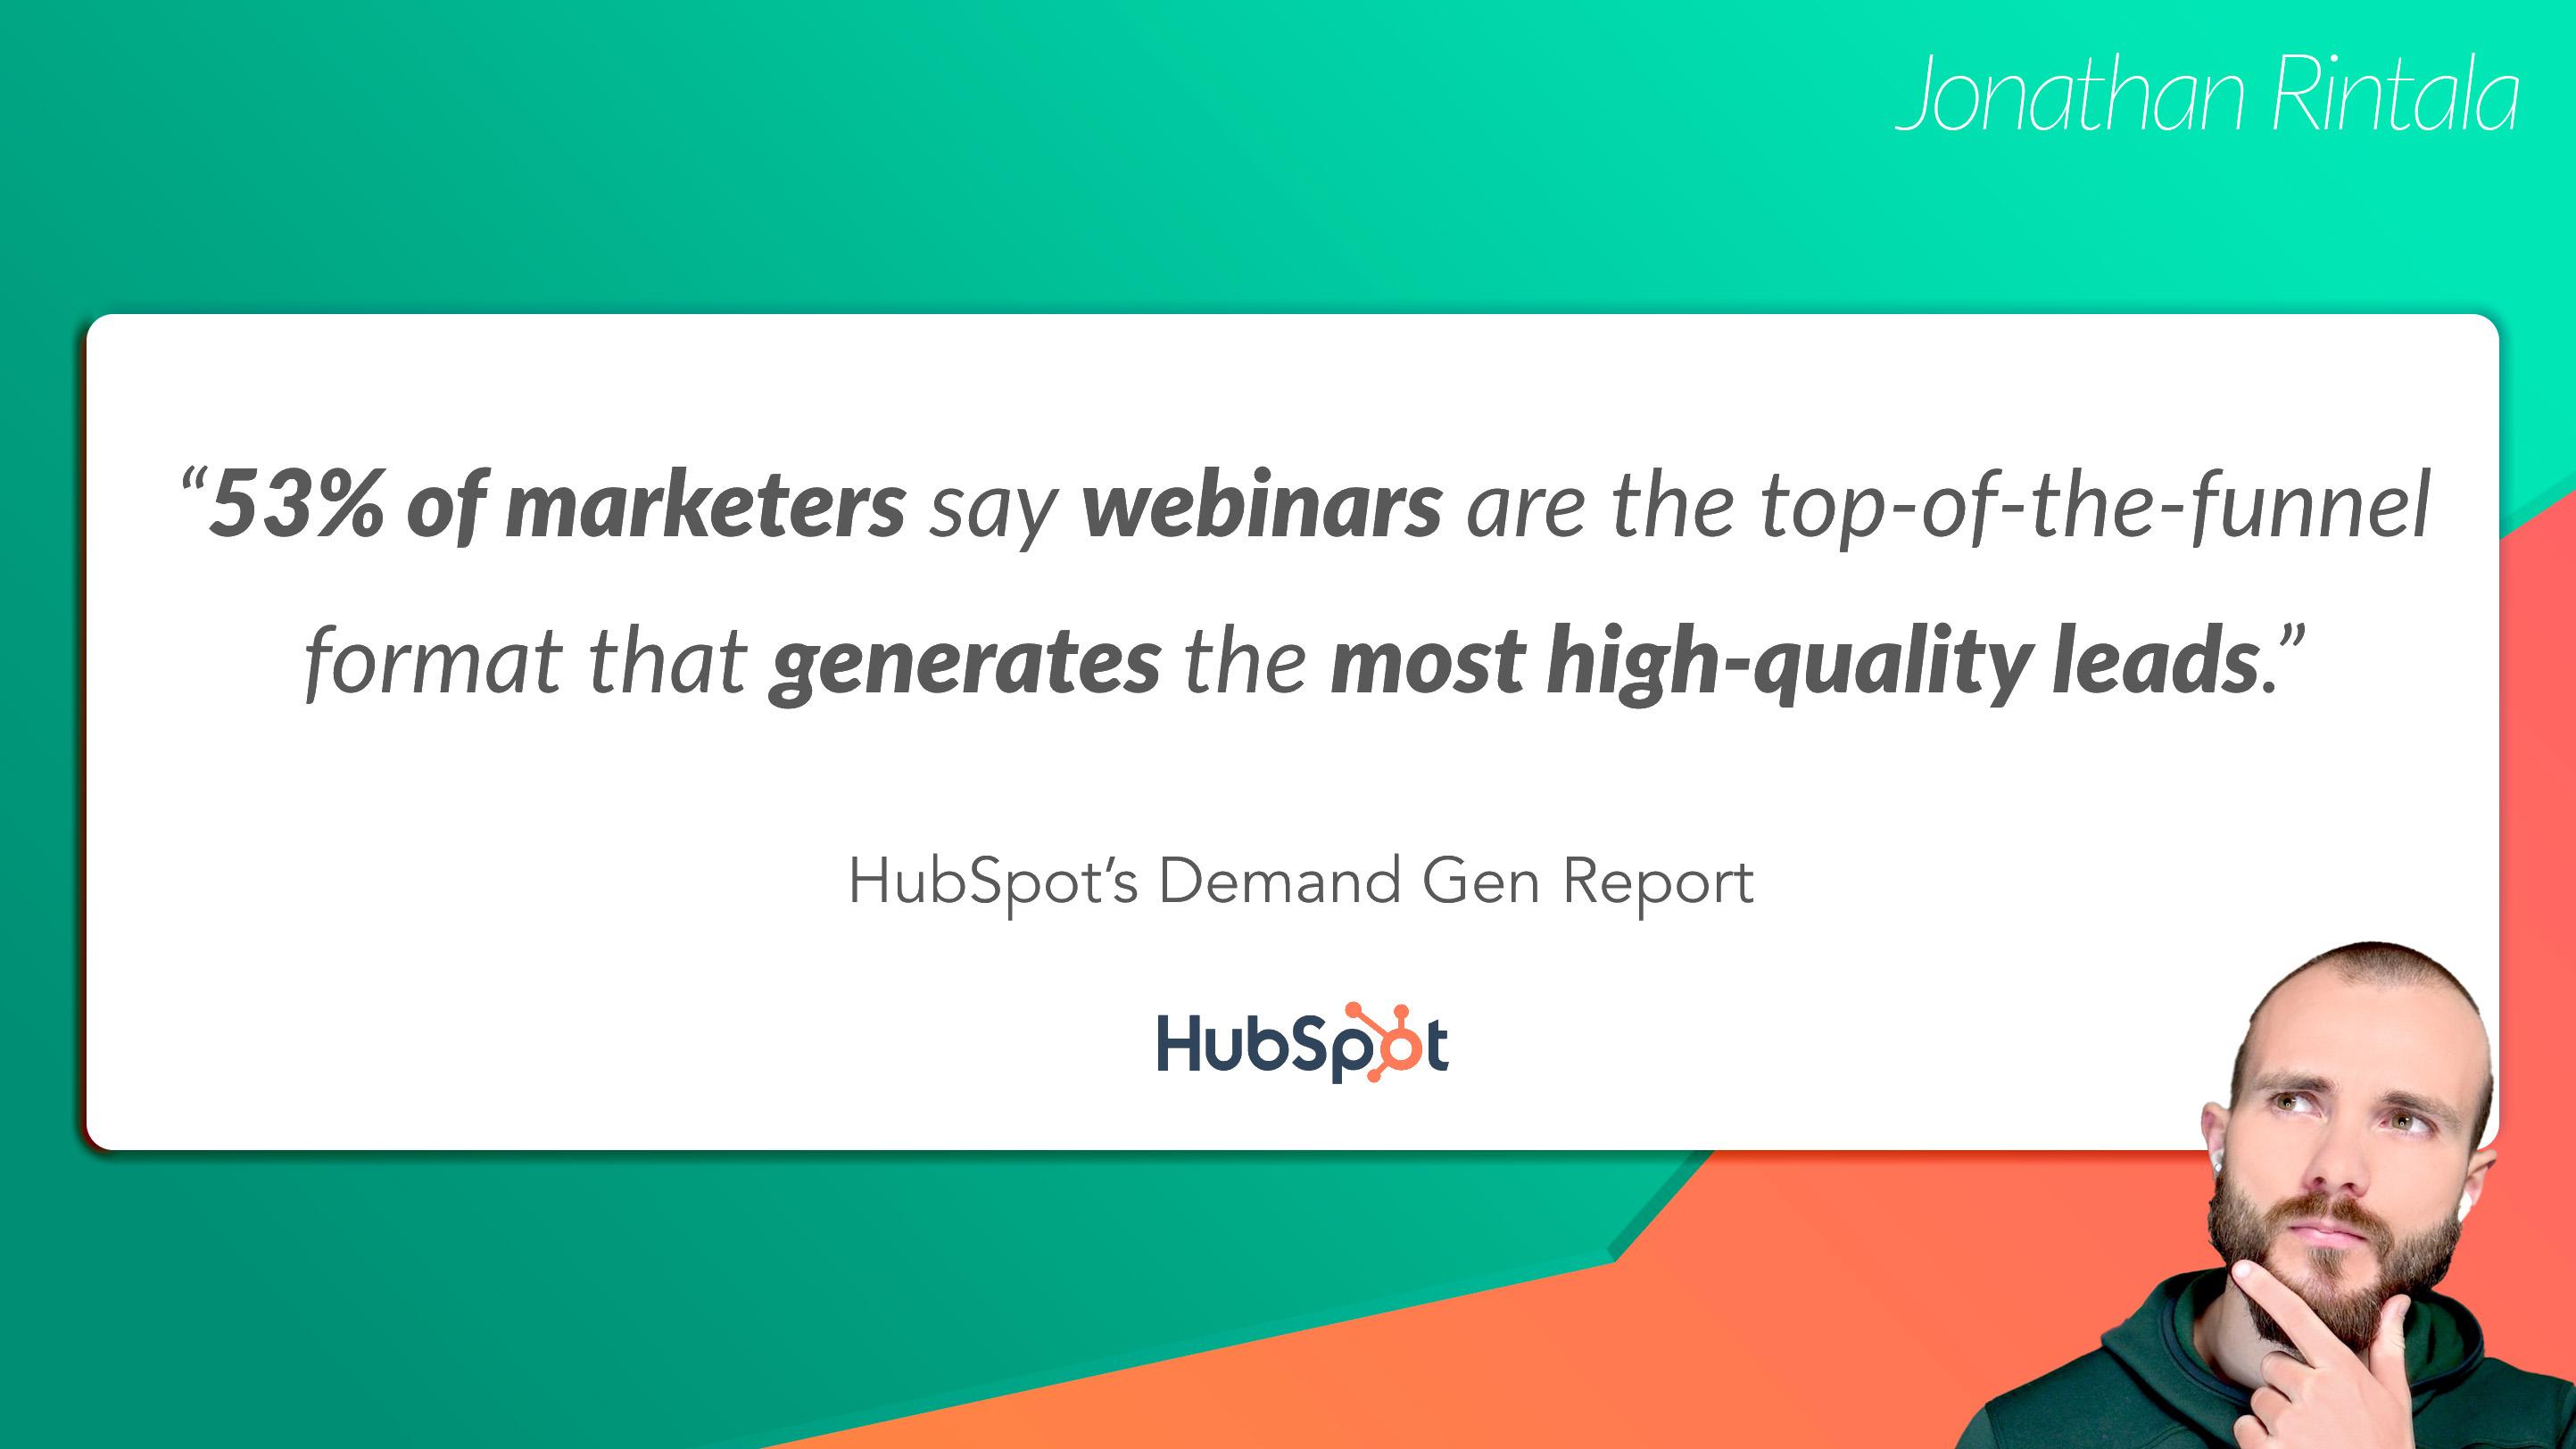 Webinars are the most high converting top-of-the-funnel format: HubSpot's Demand Gen Report